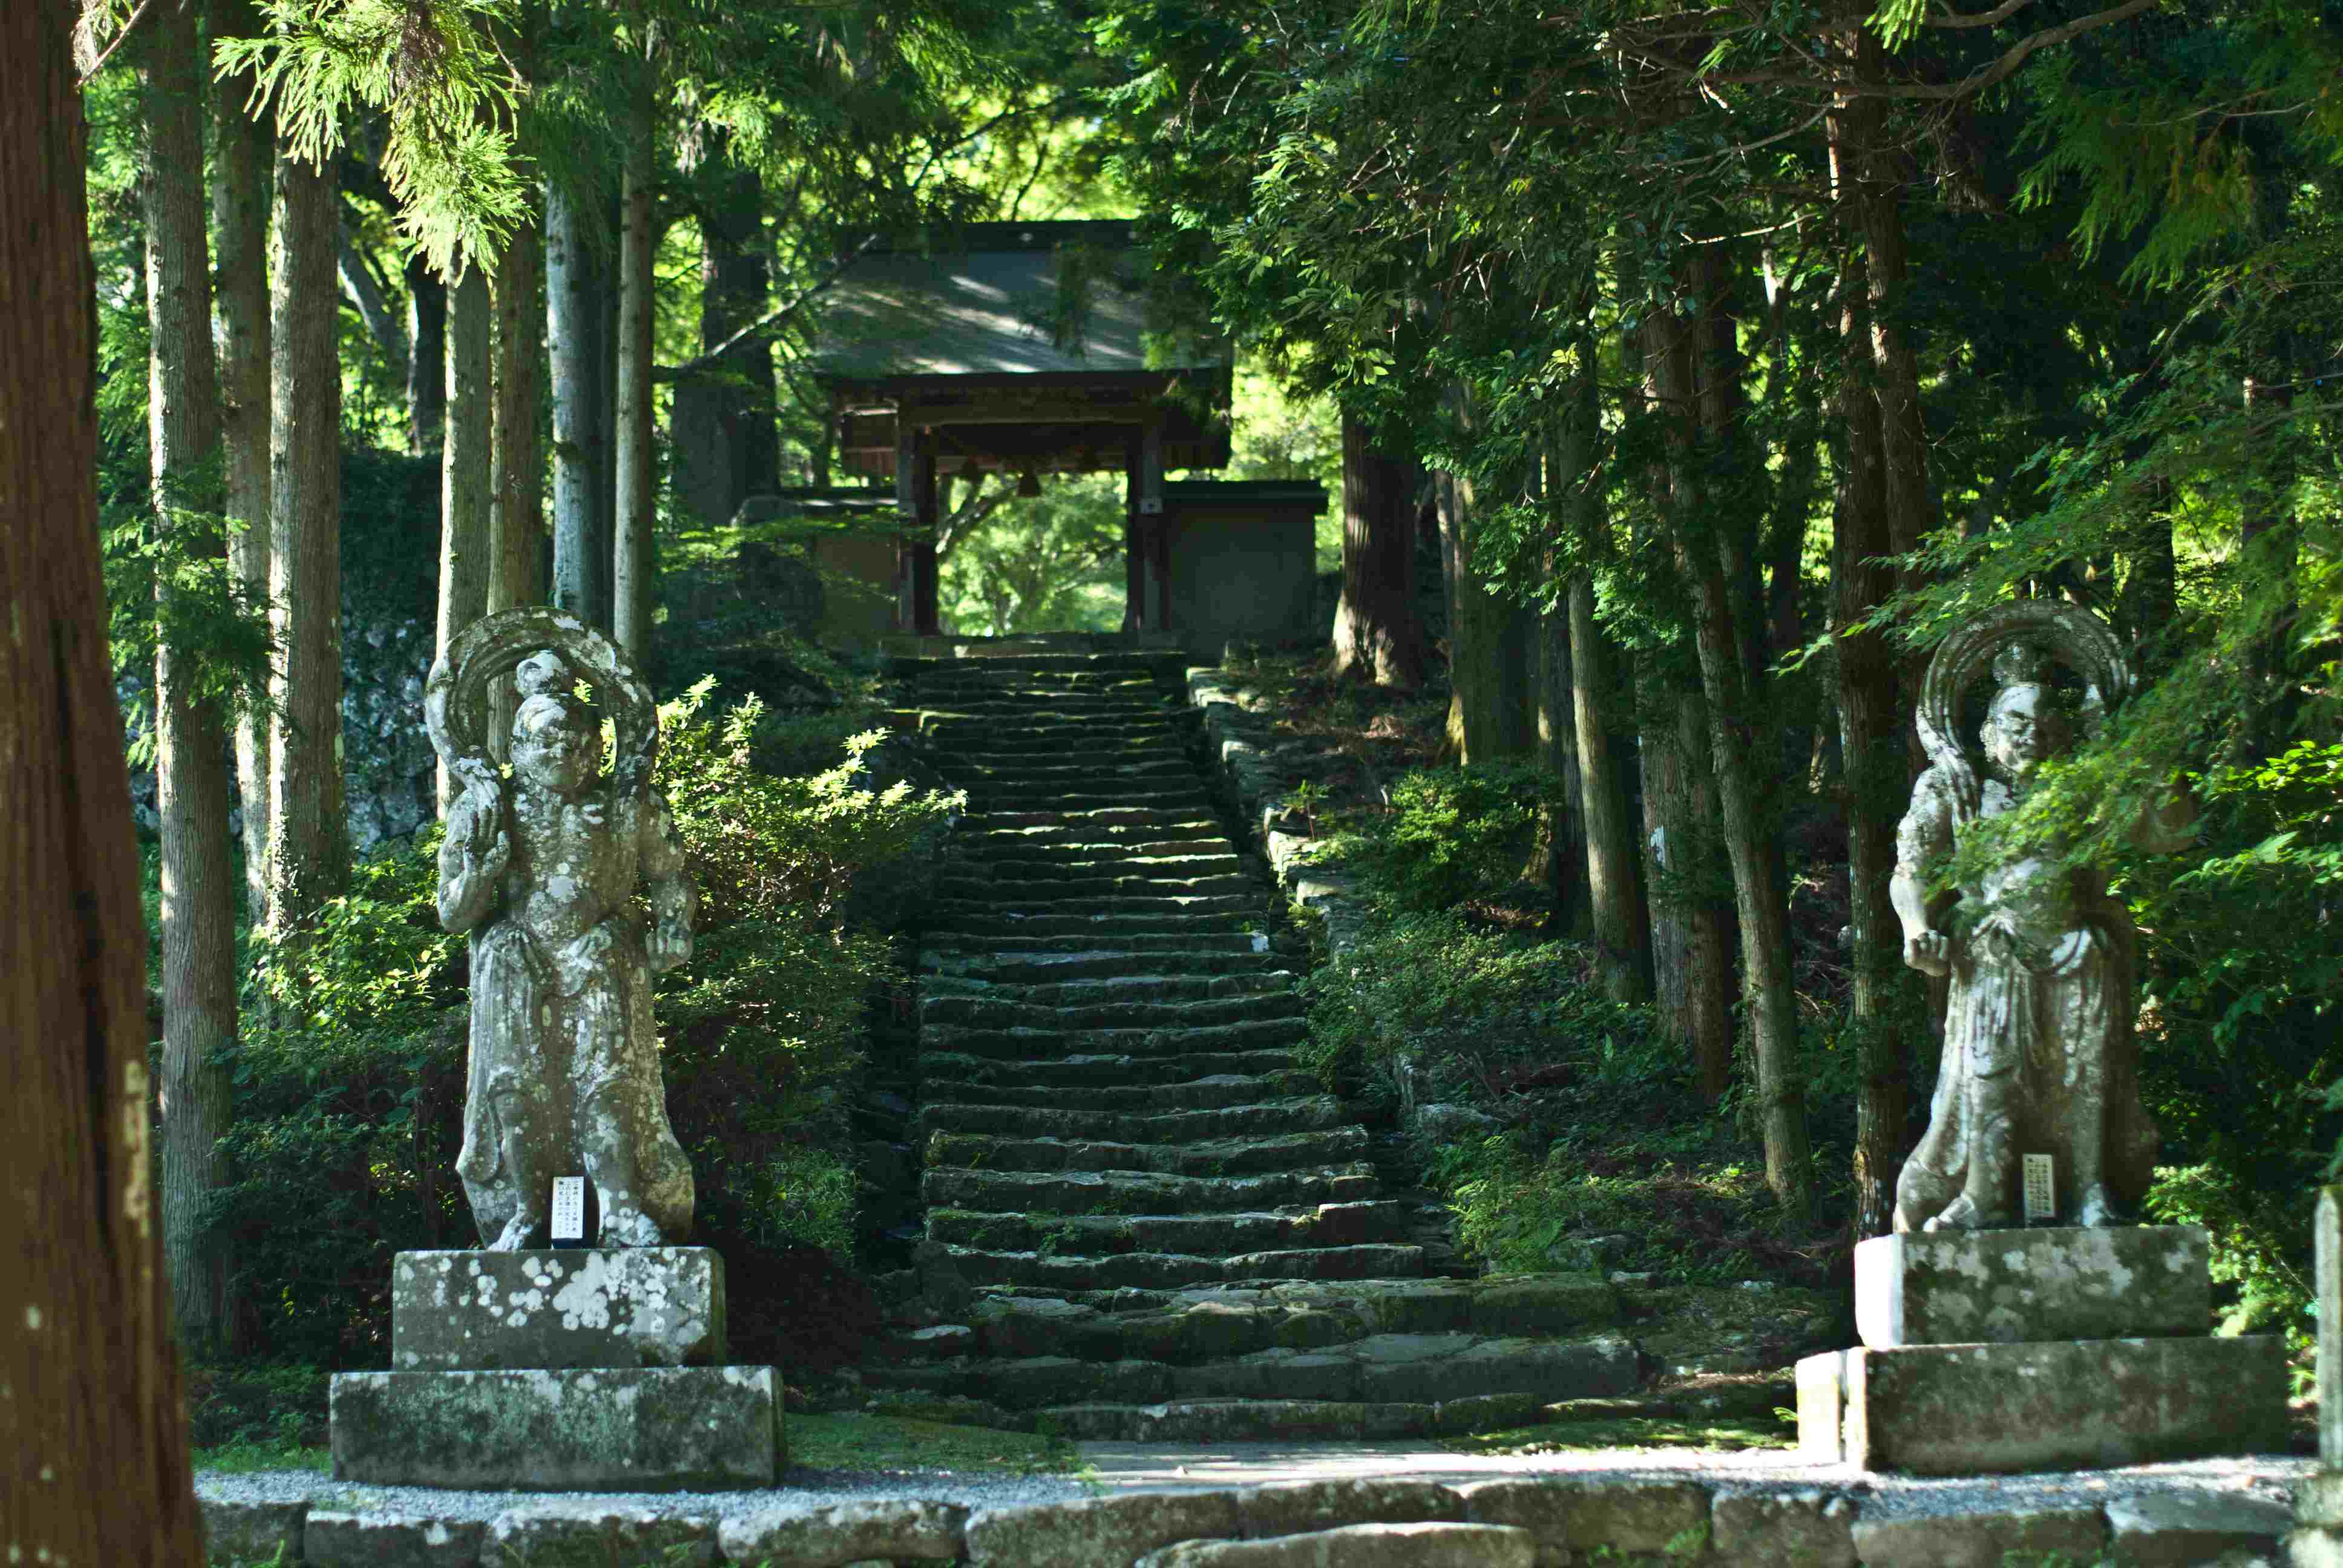 The Futagoji temple which uses the combination of Buddhism and Shintoism elements in its architecture. Usa Jingū in history was credited for the founding of this unique style.